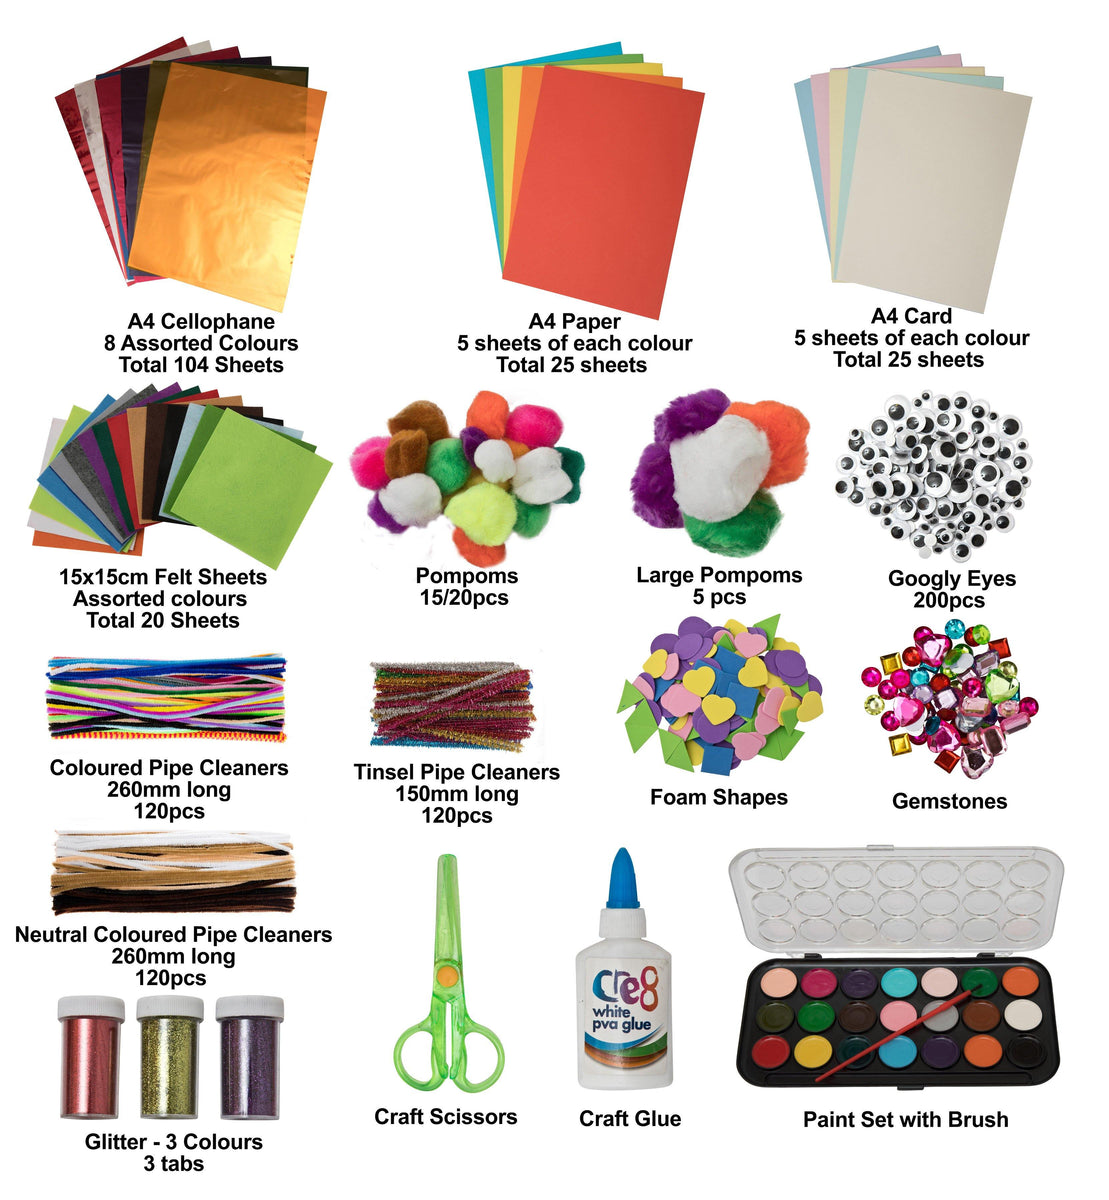 18 Must Have Affordable Craft Materials To Always Keep On Hand